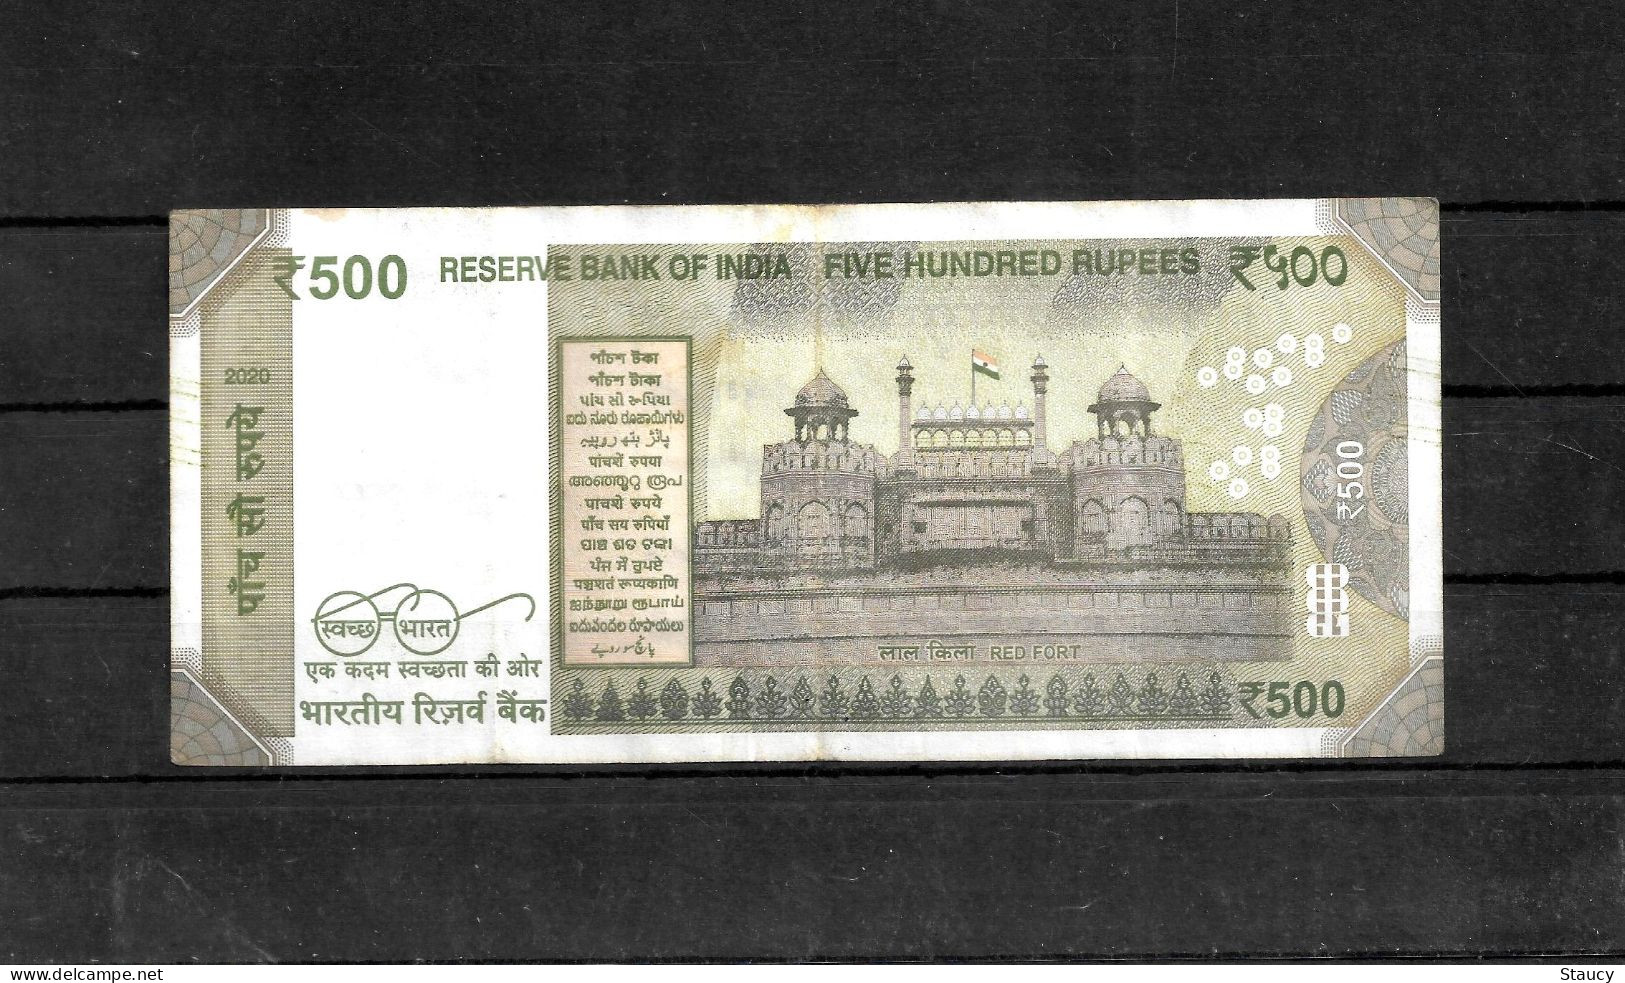 INDIA 2020 Rs. 500.00 Rupees Note Fancy / Holy / Religious Number "786" 731786" USED 100% Genuine Guaranteed As Per Scan - Autres - Asie